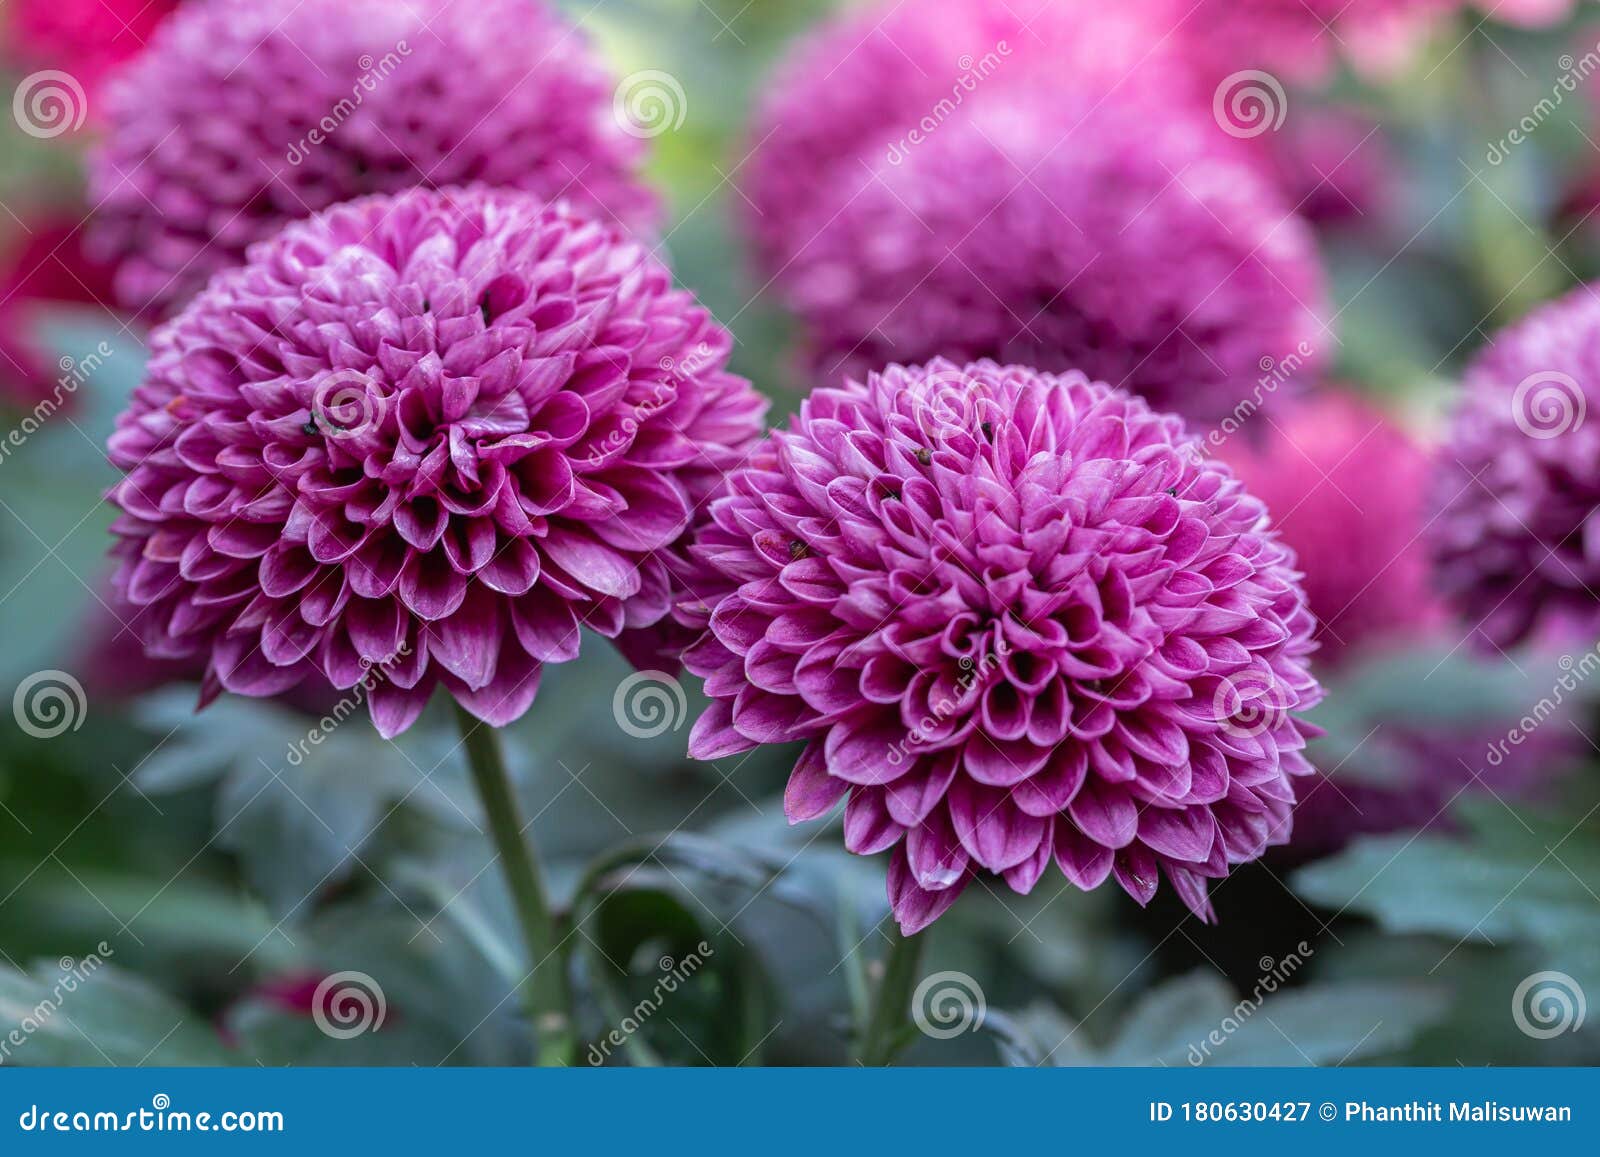 Pompom Chrysanthemums Flower In Garden At Sunny Summer Or Spring Day For Decoration And Agriculture Design Stock Image Image Of Detail Beautiful 180630427